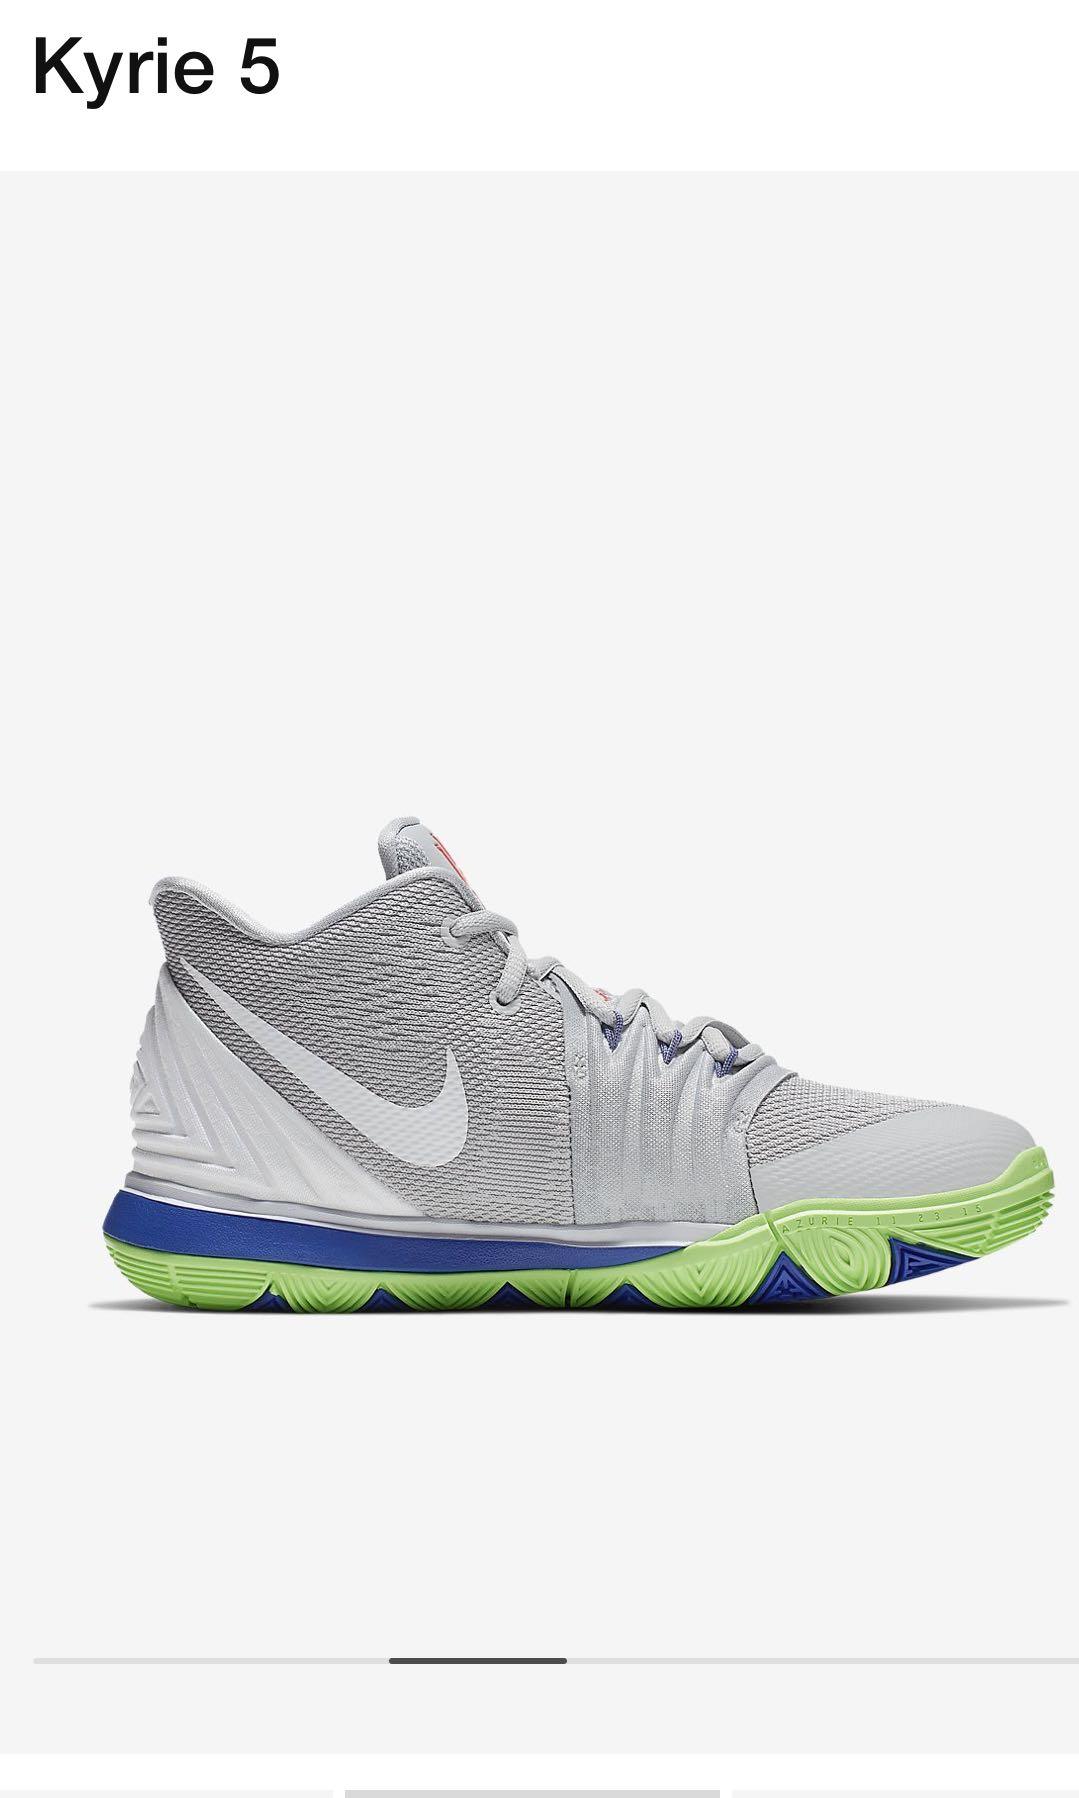 kyrie 5 basketball shoes